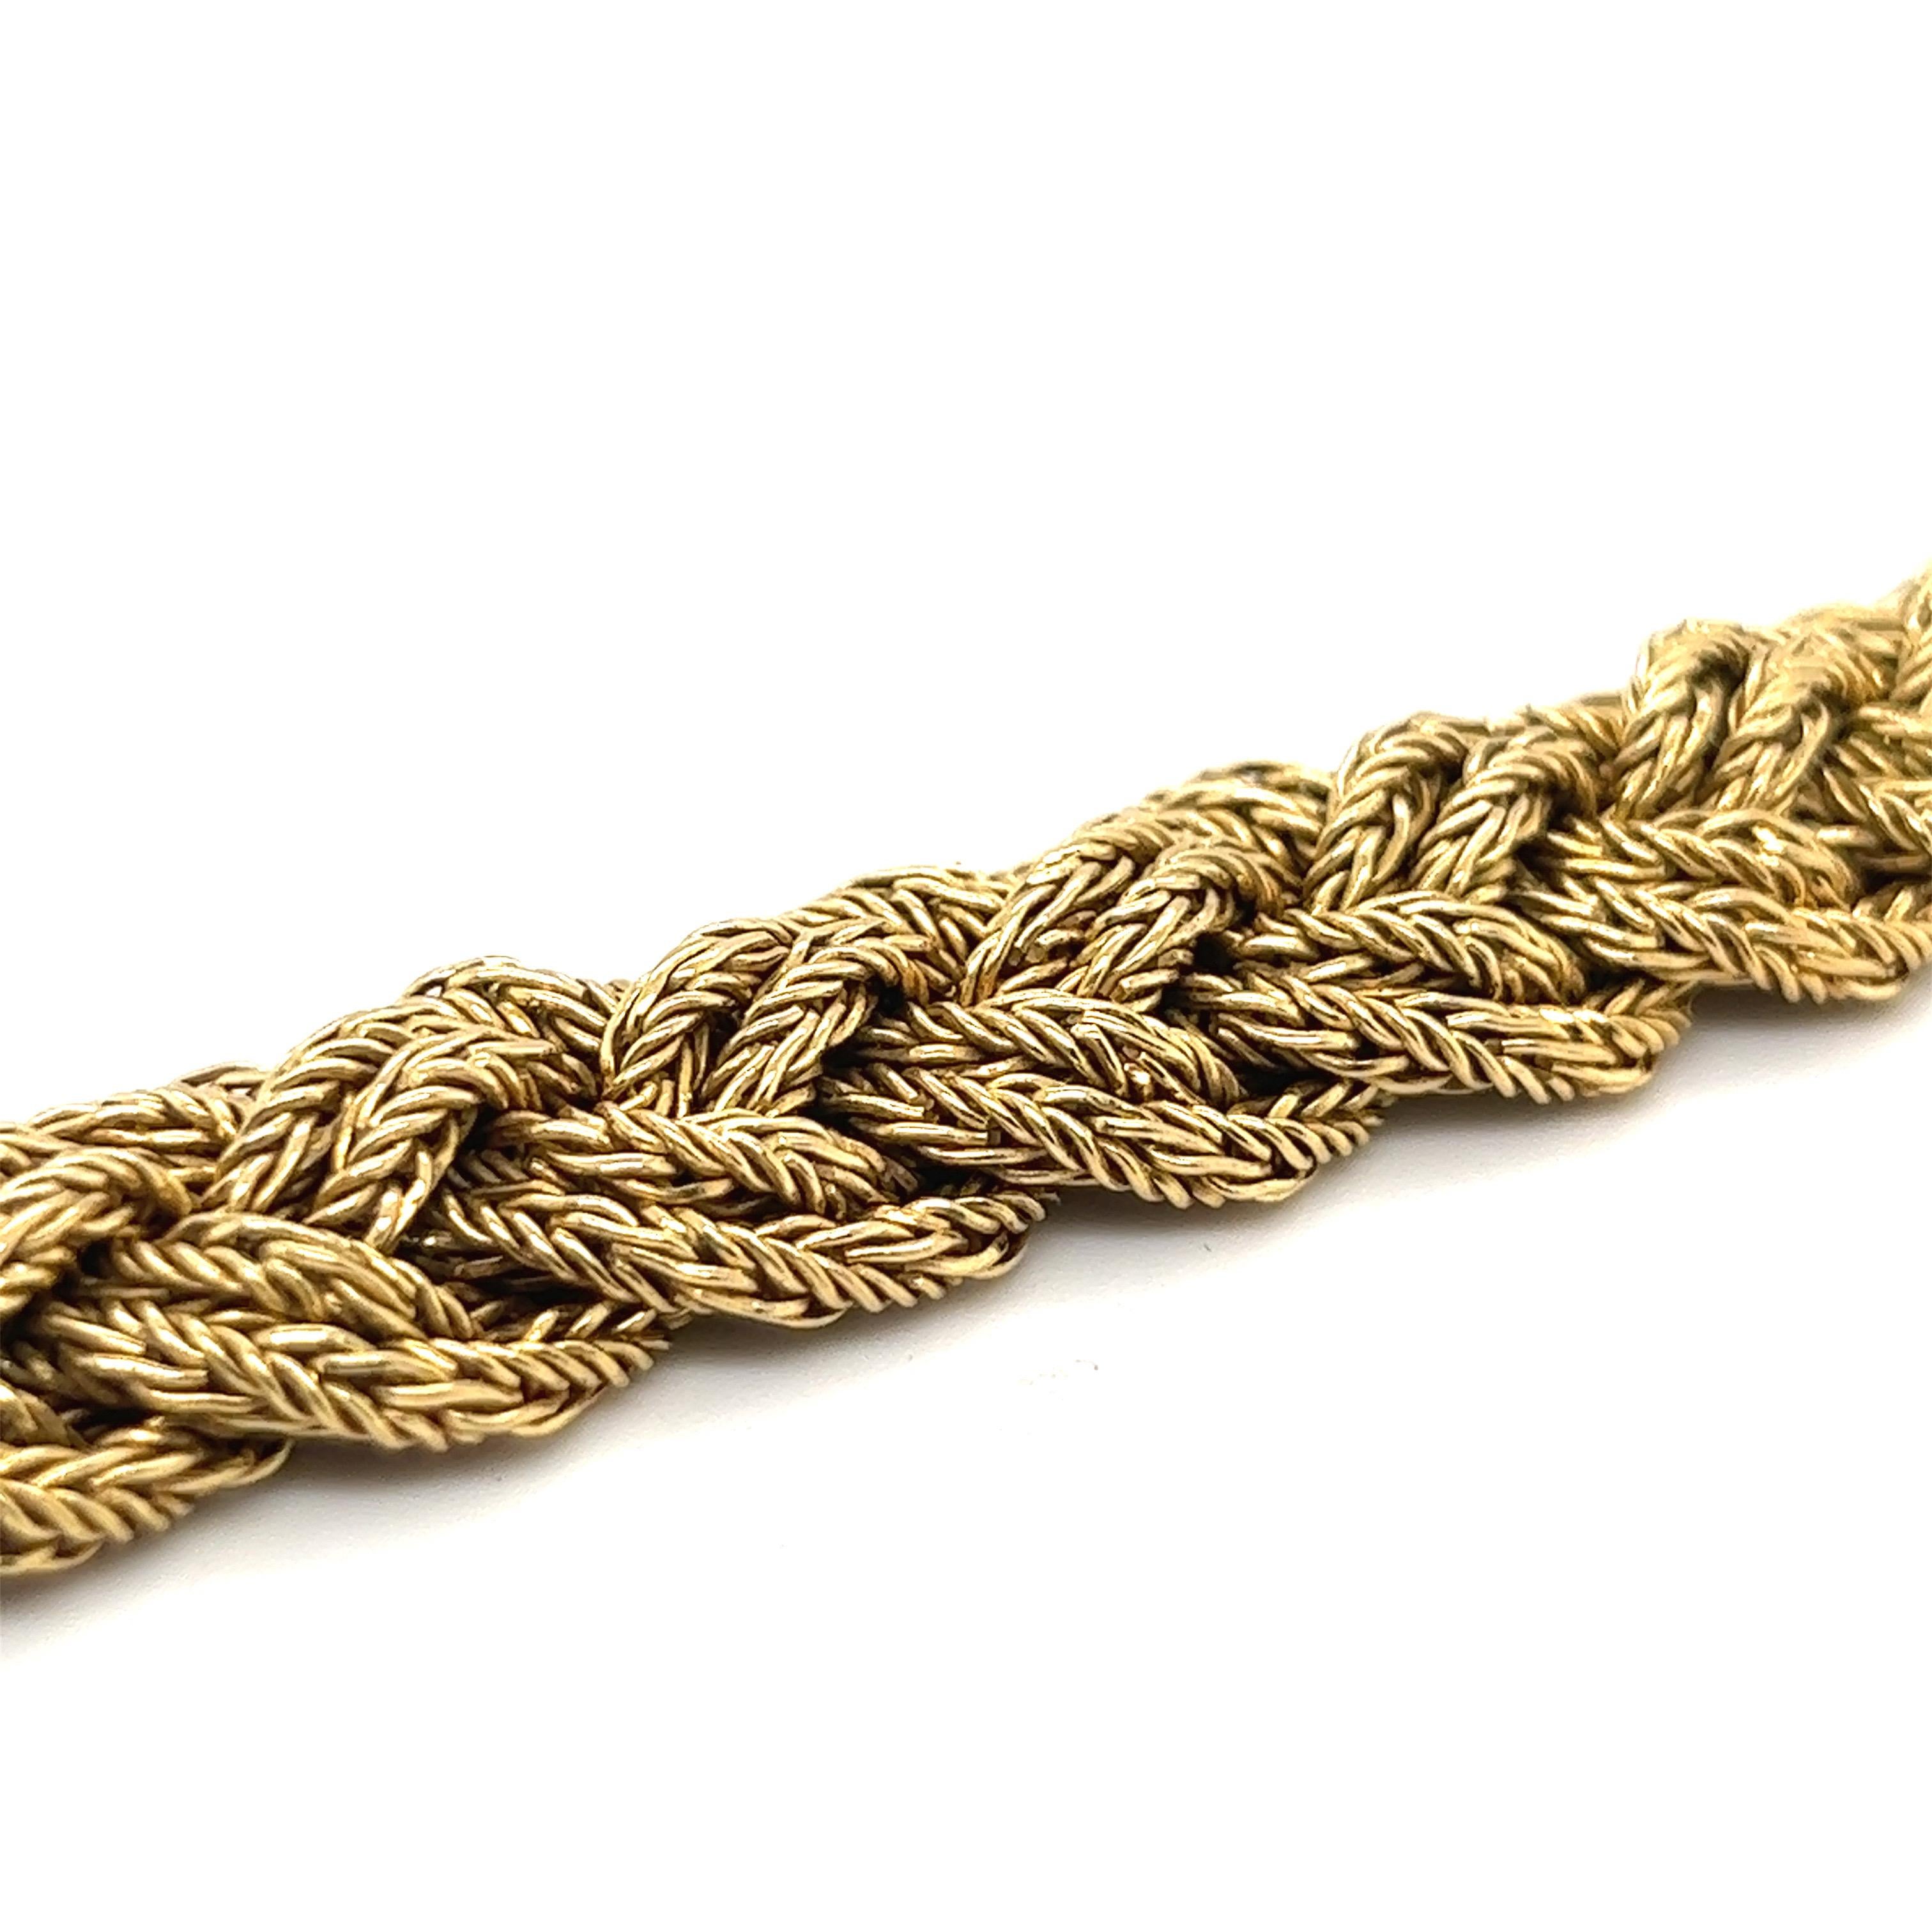 Wonderful 18 karat yellow gold bracelet with braided pattern, late 20th Century.
Crafted in 18 karat yellow gold and composed of 3 sets of corded gold wires interlaced as a braid. The bracelet is exceptionally flexible and supple and literally